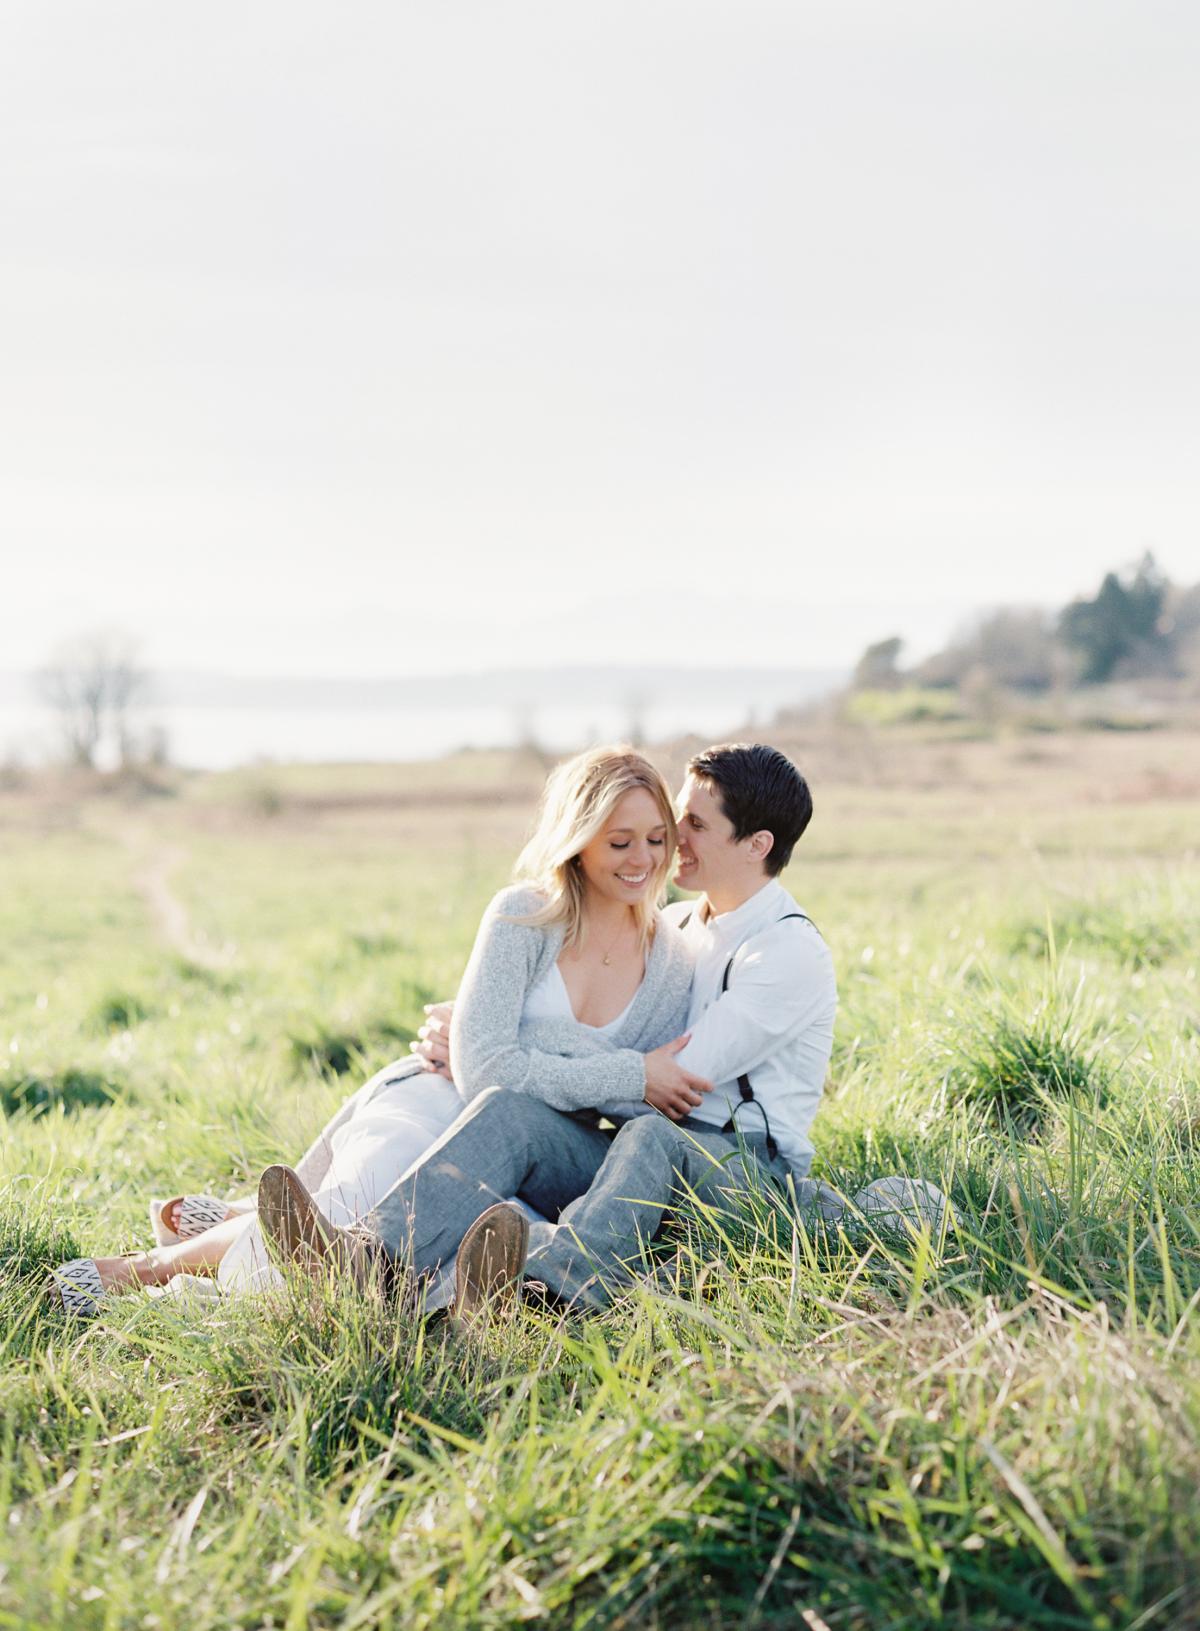 Simple Chic Outdoor Engagement 0013